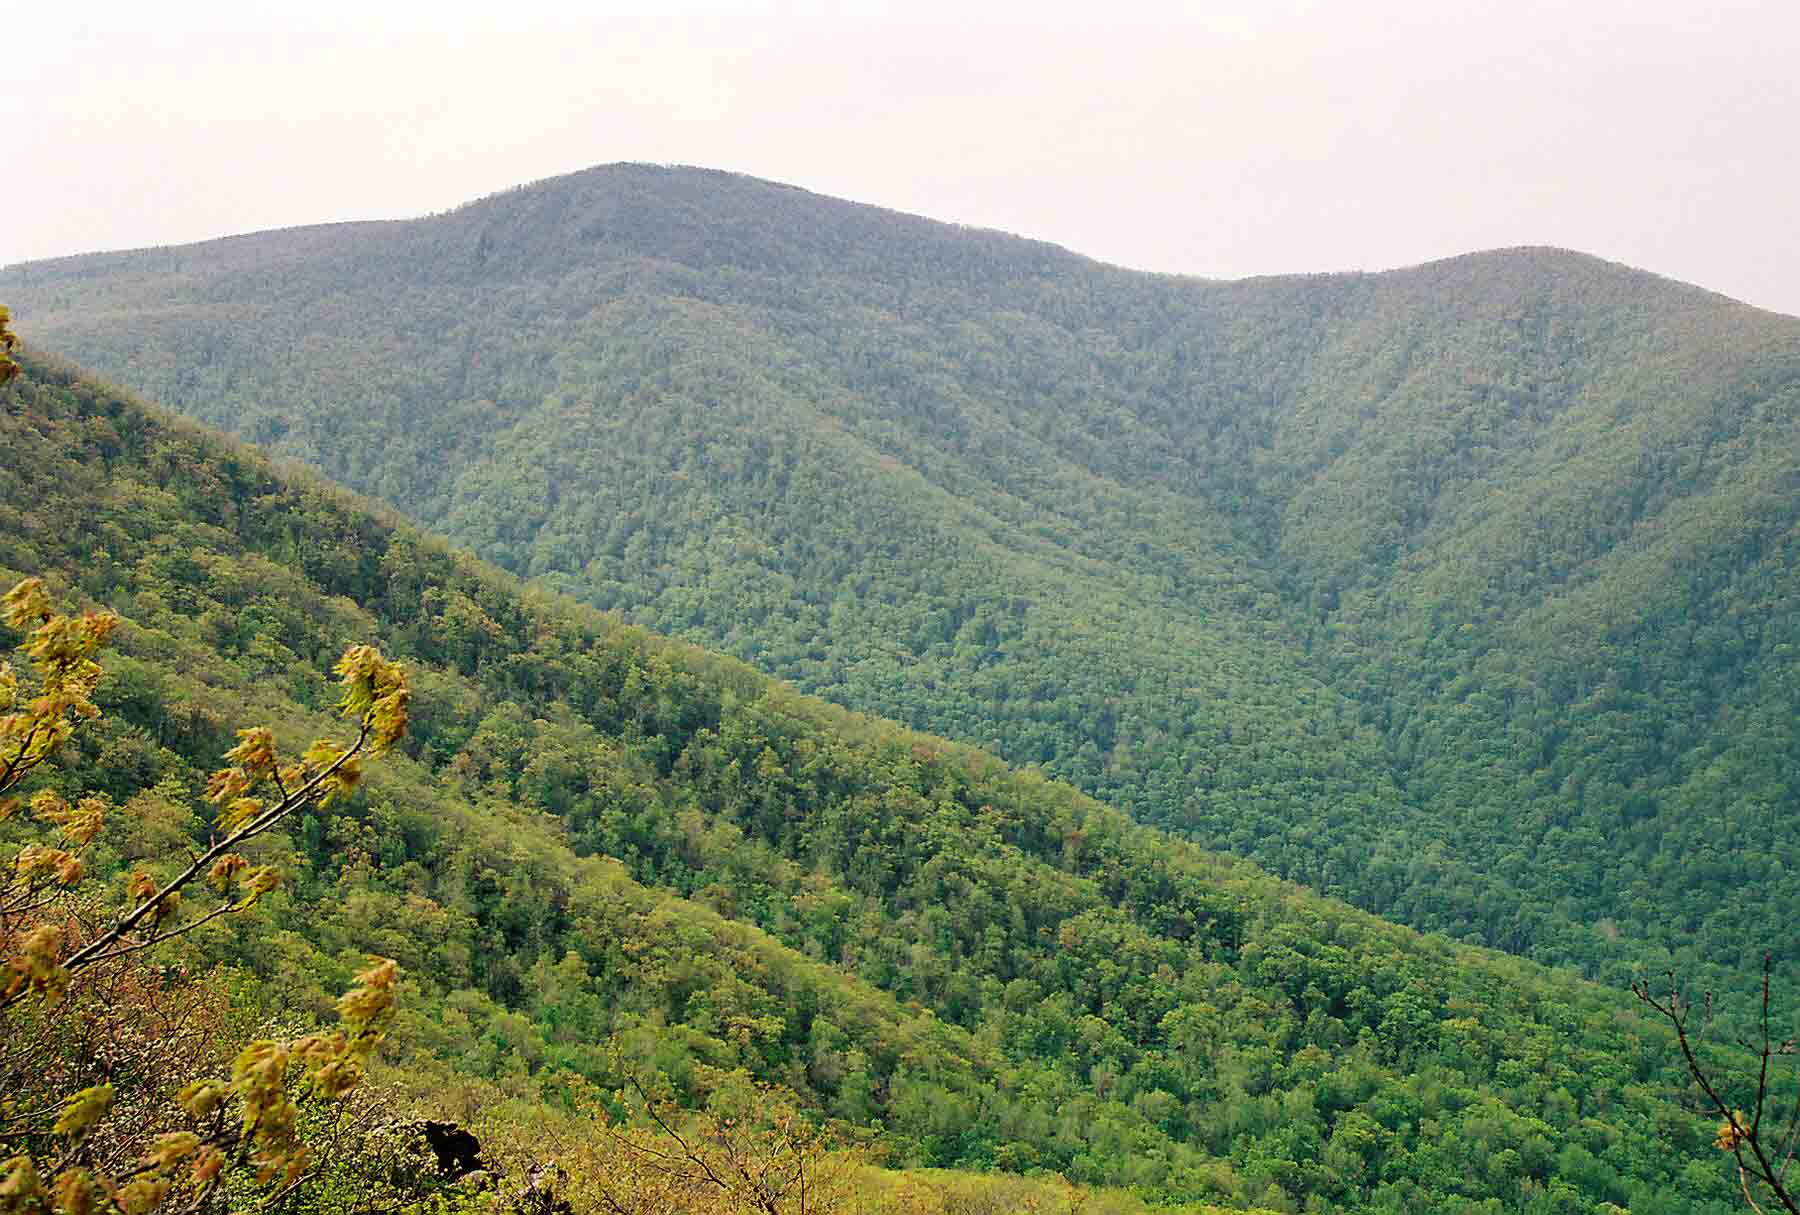 View of Hawksbill, highest mountain in Shenandoah National Park, from the north. The line of the AT can be seen as it traverses the side of Hawksbill from Hawksbill Gap on the far left of the picture to the col between Hawksbill and the peak to its right. Taken at approx. MM 1.3.  Courtesy dlcul@conncoll.edu